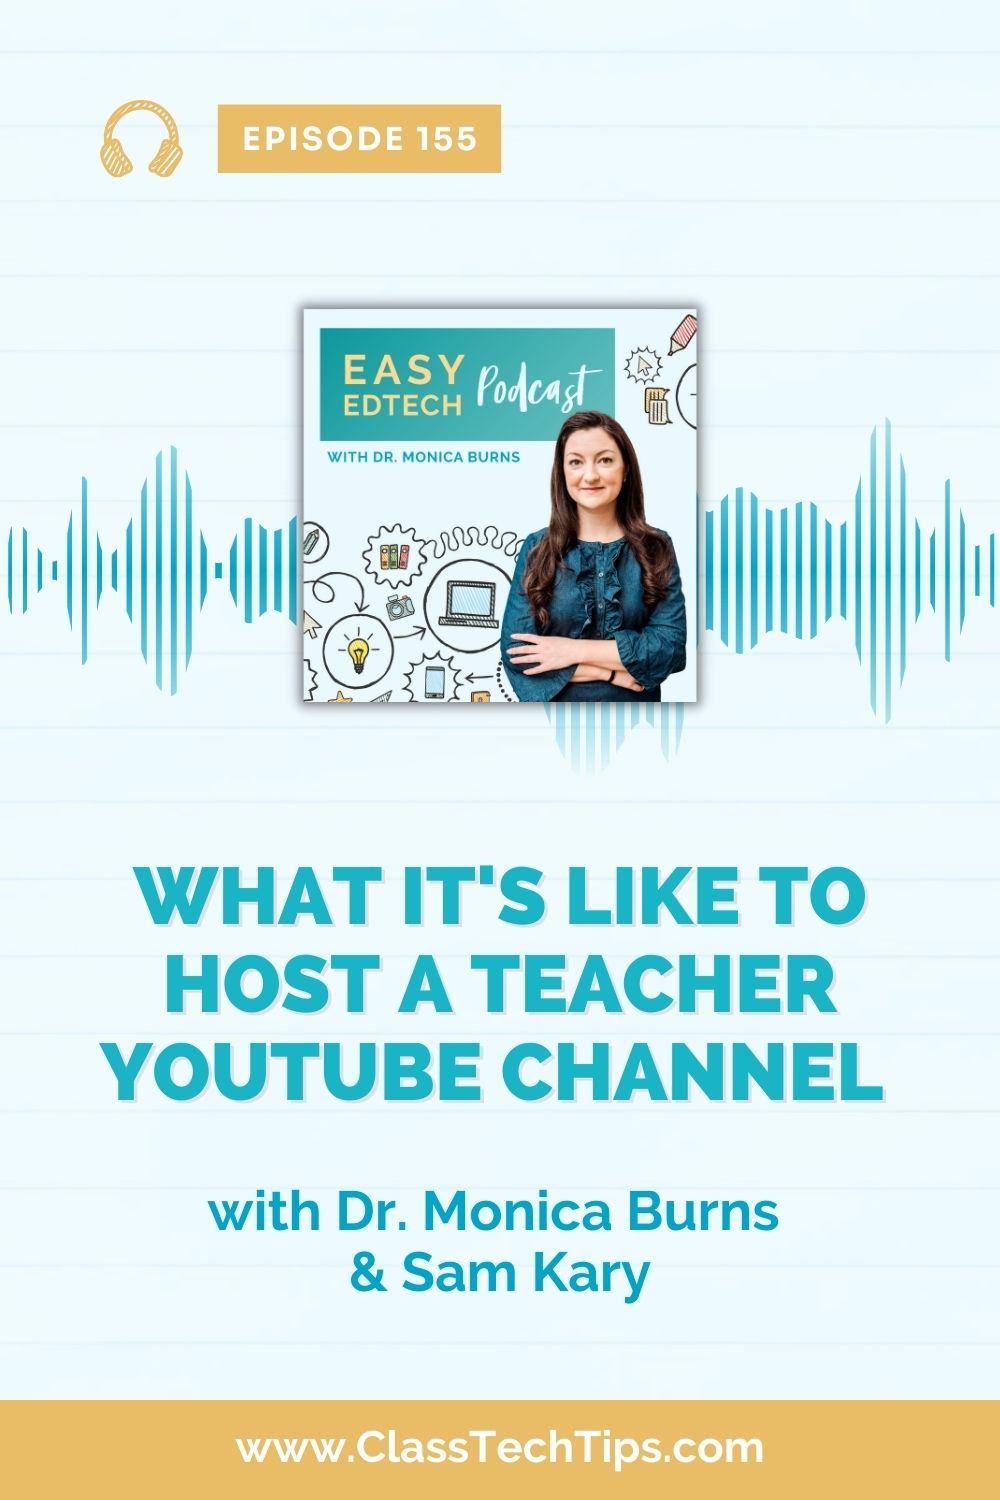 In this episode, educator and YouTuber Sam Kary shares a behind-the-scenes look at his popular YouTube channel for educators. You’ll also hear his advice and suggestions for starting your very own teacher YouTube channel!